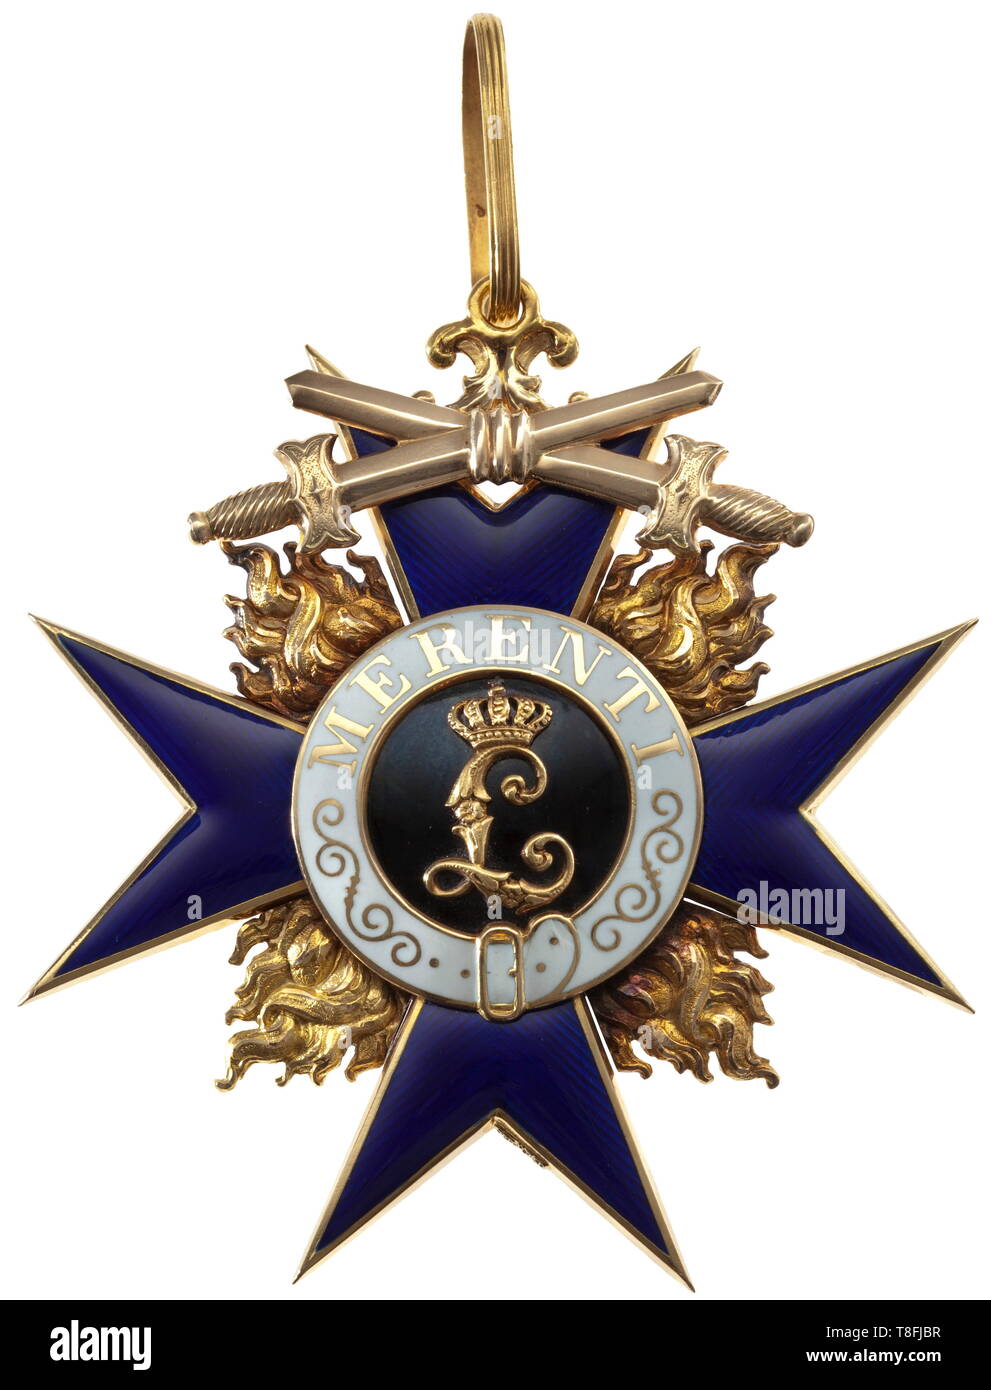 A Grand Cross with Swords of the Bavarian Military Merit Order Cross of the Order in Gold from the pre-1917 period of the First World War. The award, produced by the Hemmerle Brothers in Munich, is marked 'GEB.H. 750' in the lower cross arm. Between the hollow wrought, blue enameled cross arms the flames are individually inset and finely re-engraved in order to amplify their fire. The three-section medallion is white and black enameled. The swords, likewise hollow hand-wrought and completed on both sides, are affixed at their cen 20th century, Additional-Rights-Clearance-Info-Not-Available Stock Photo